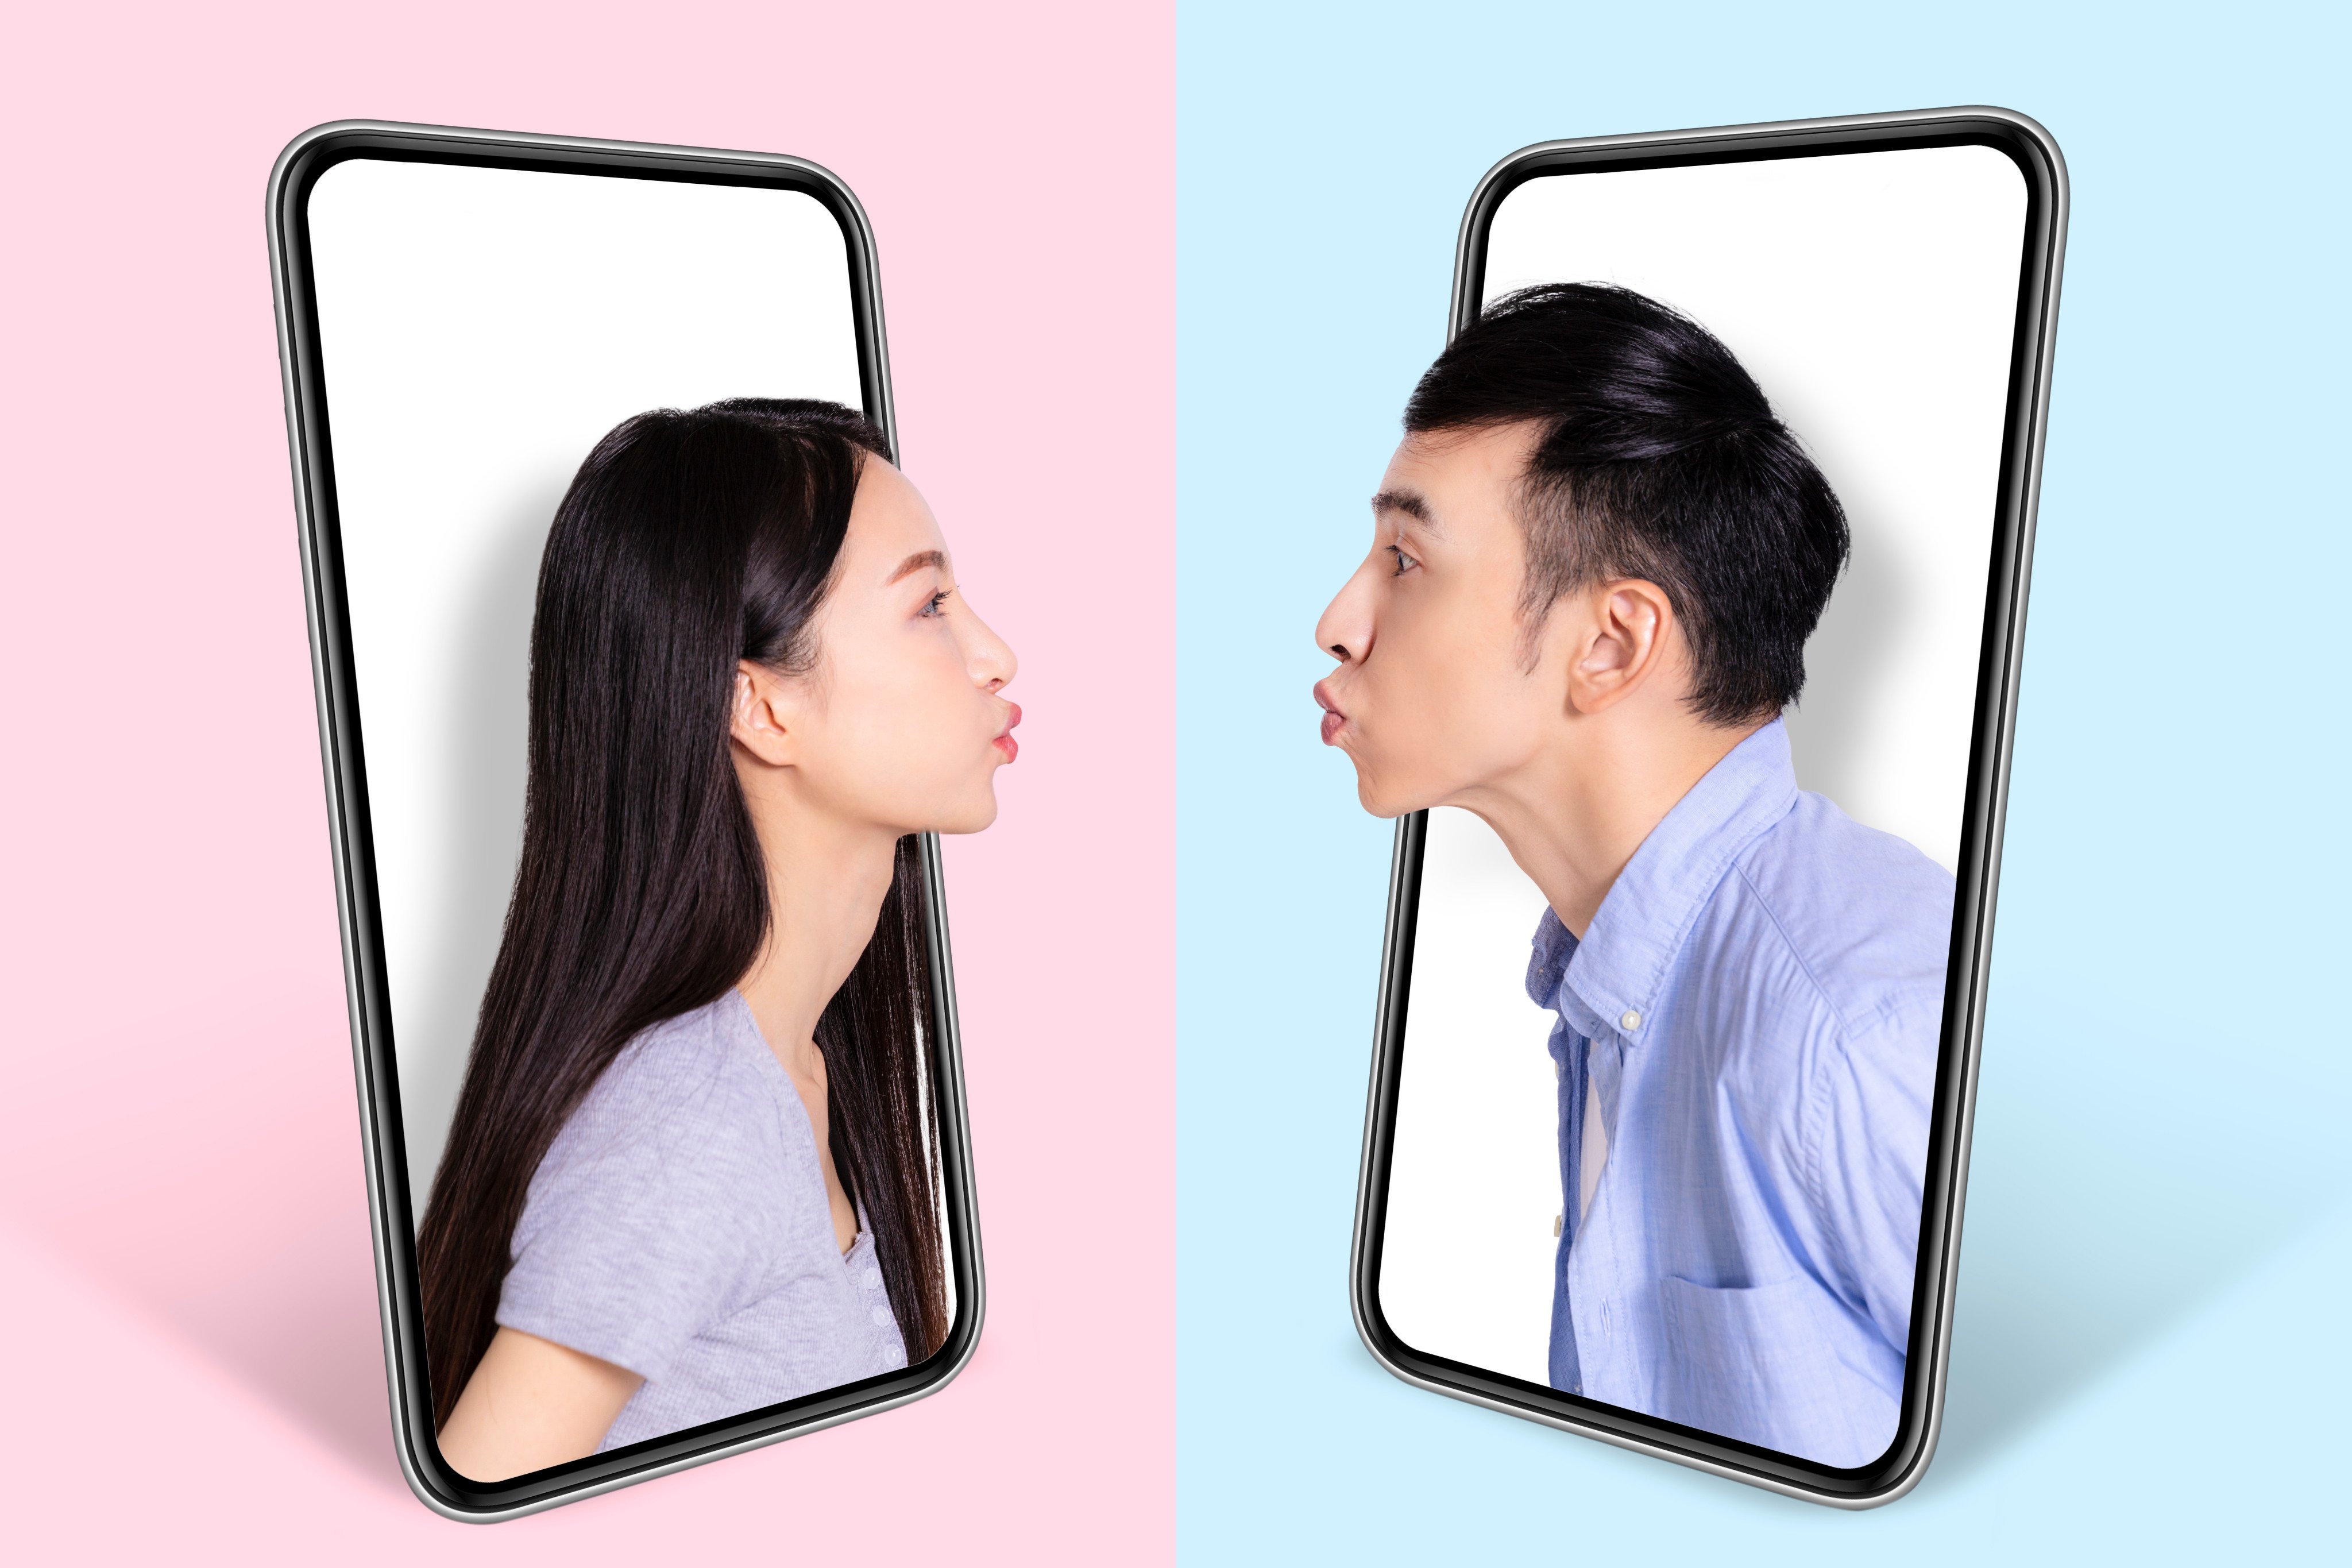 Research from dating apps Tinder, Bumble and Coffee Meets Bagel shows that Gen Z see dating as less complicated, prioritising self-love and personal fulfilment as qualities they look for. Photo: Shutterstock